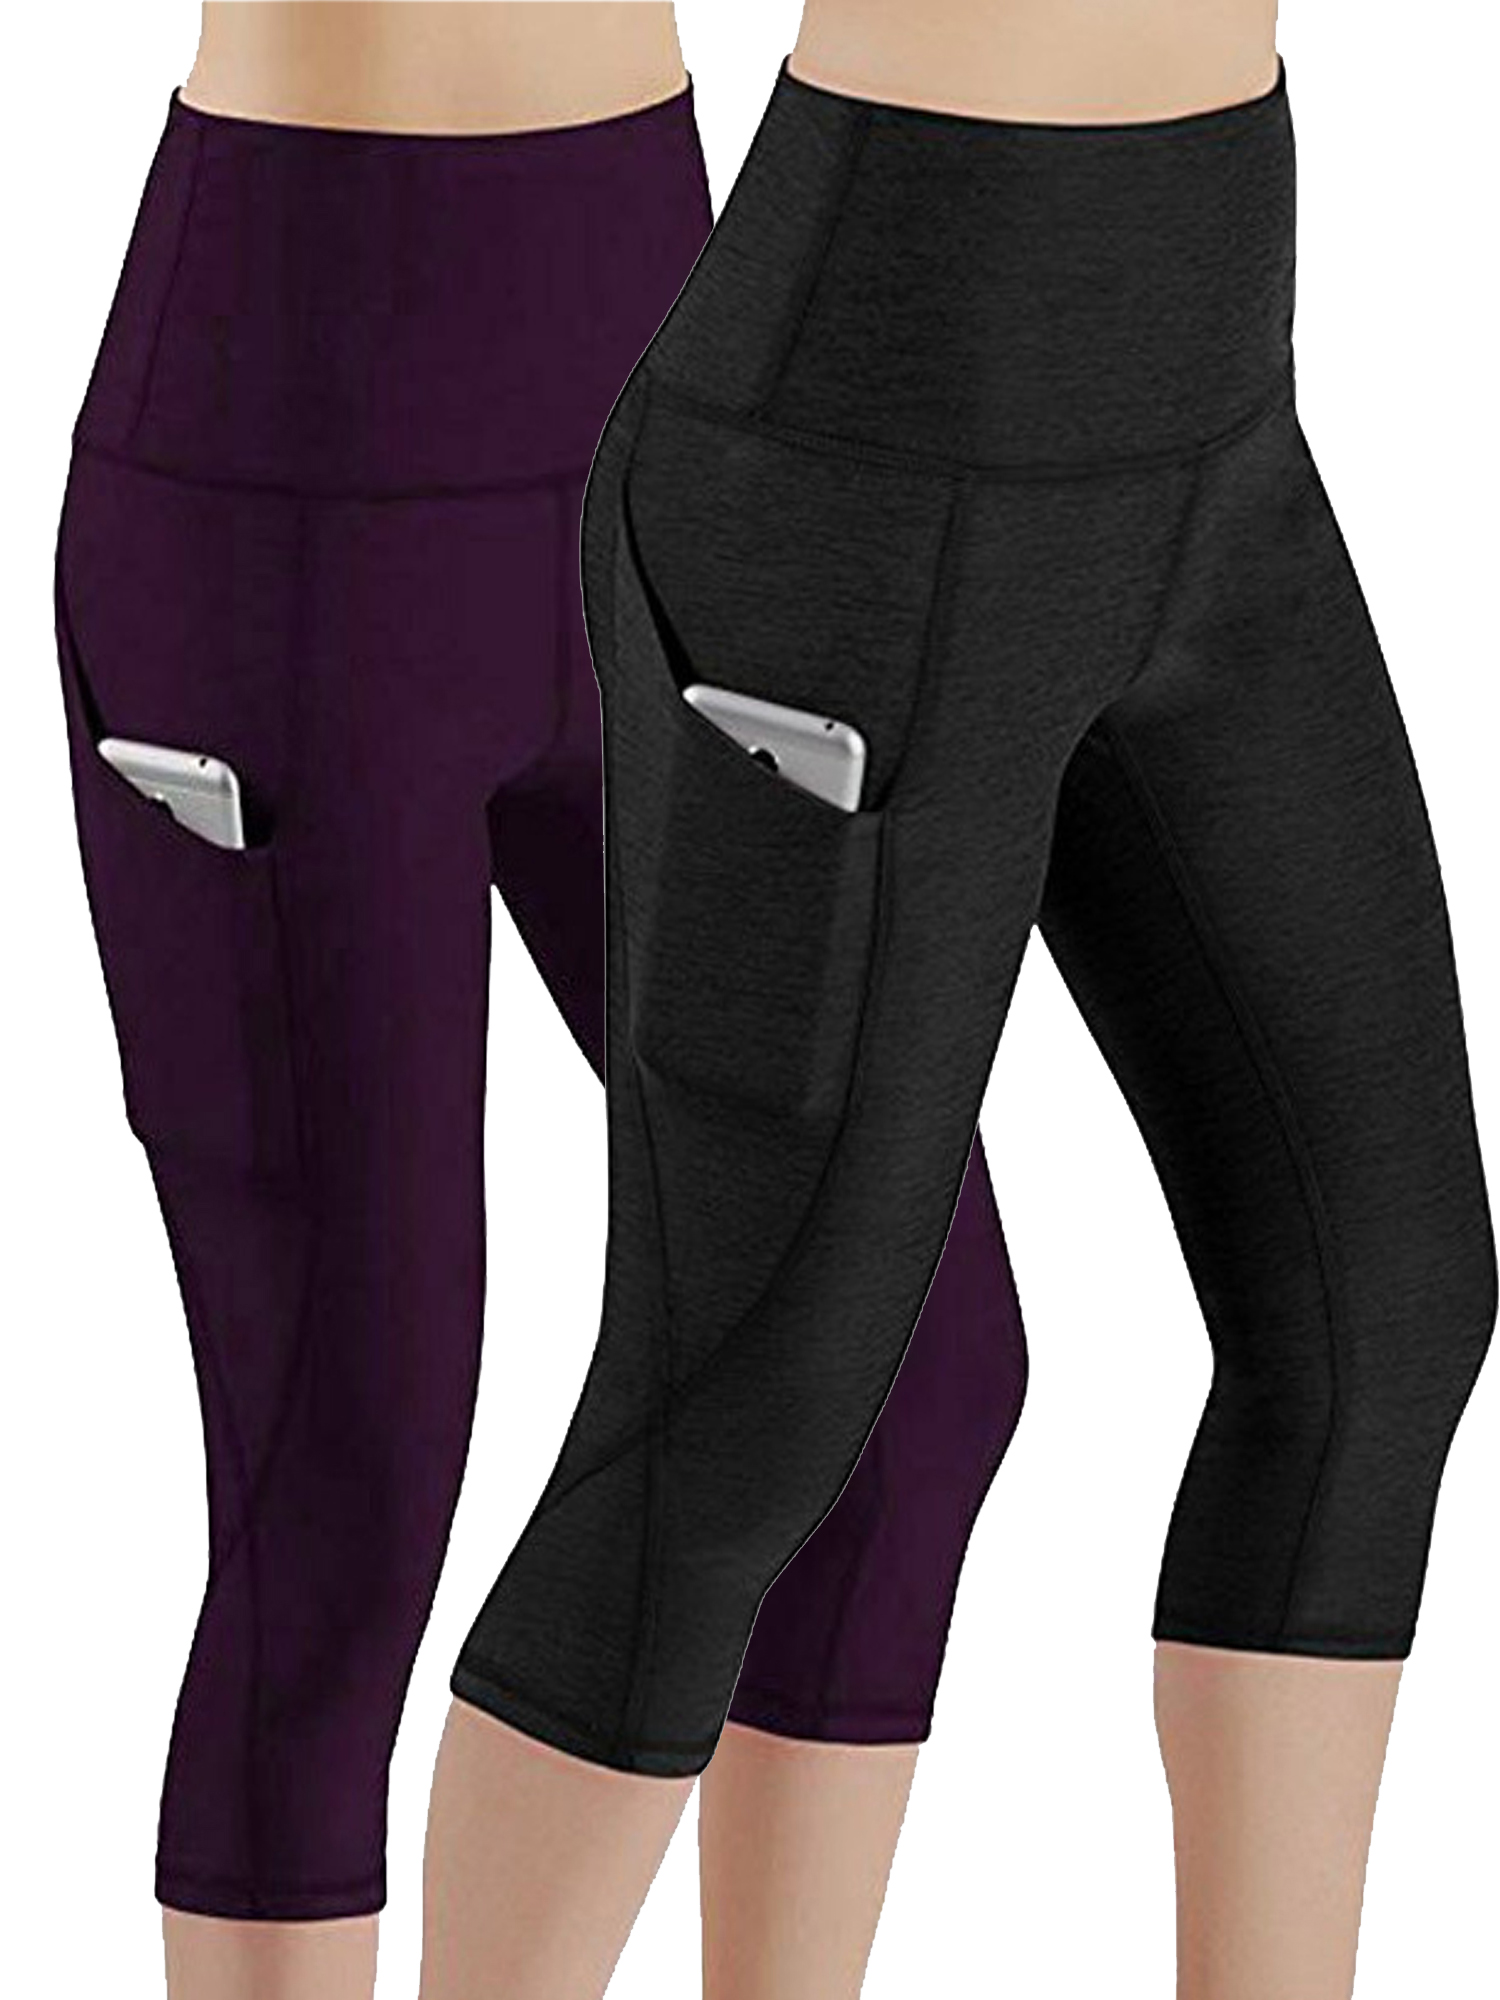 MAWCLOS 2psc Women Capri Leggings Tights Tummy Conytol High Waist Cropped Yoga Pants for Running Fitness with Pocket - image 1 of 8